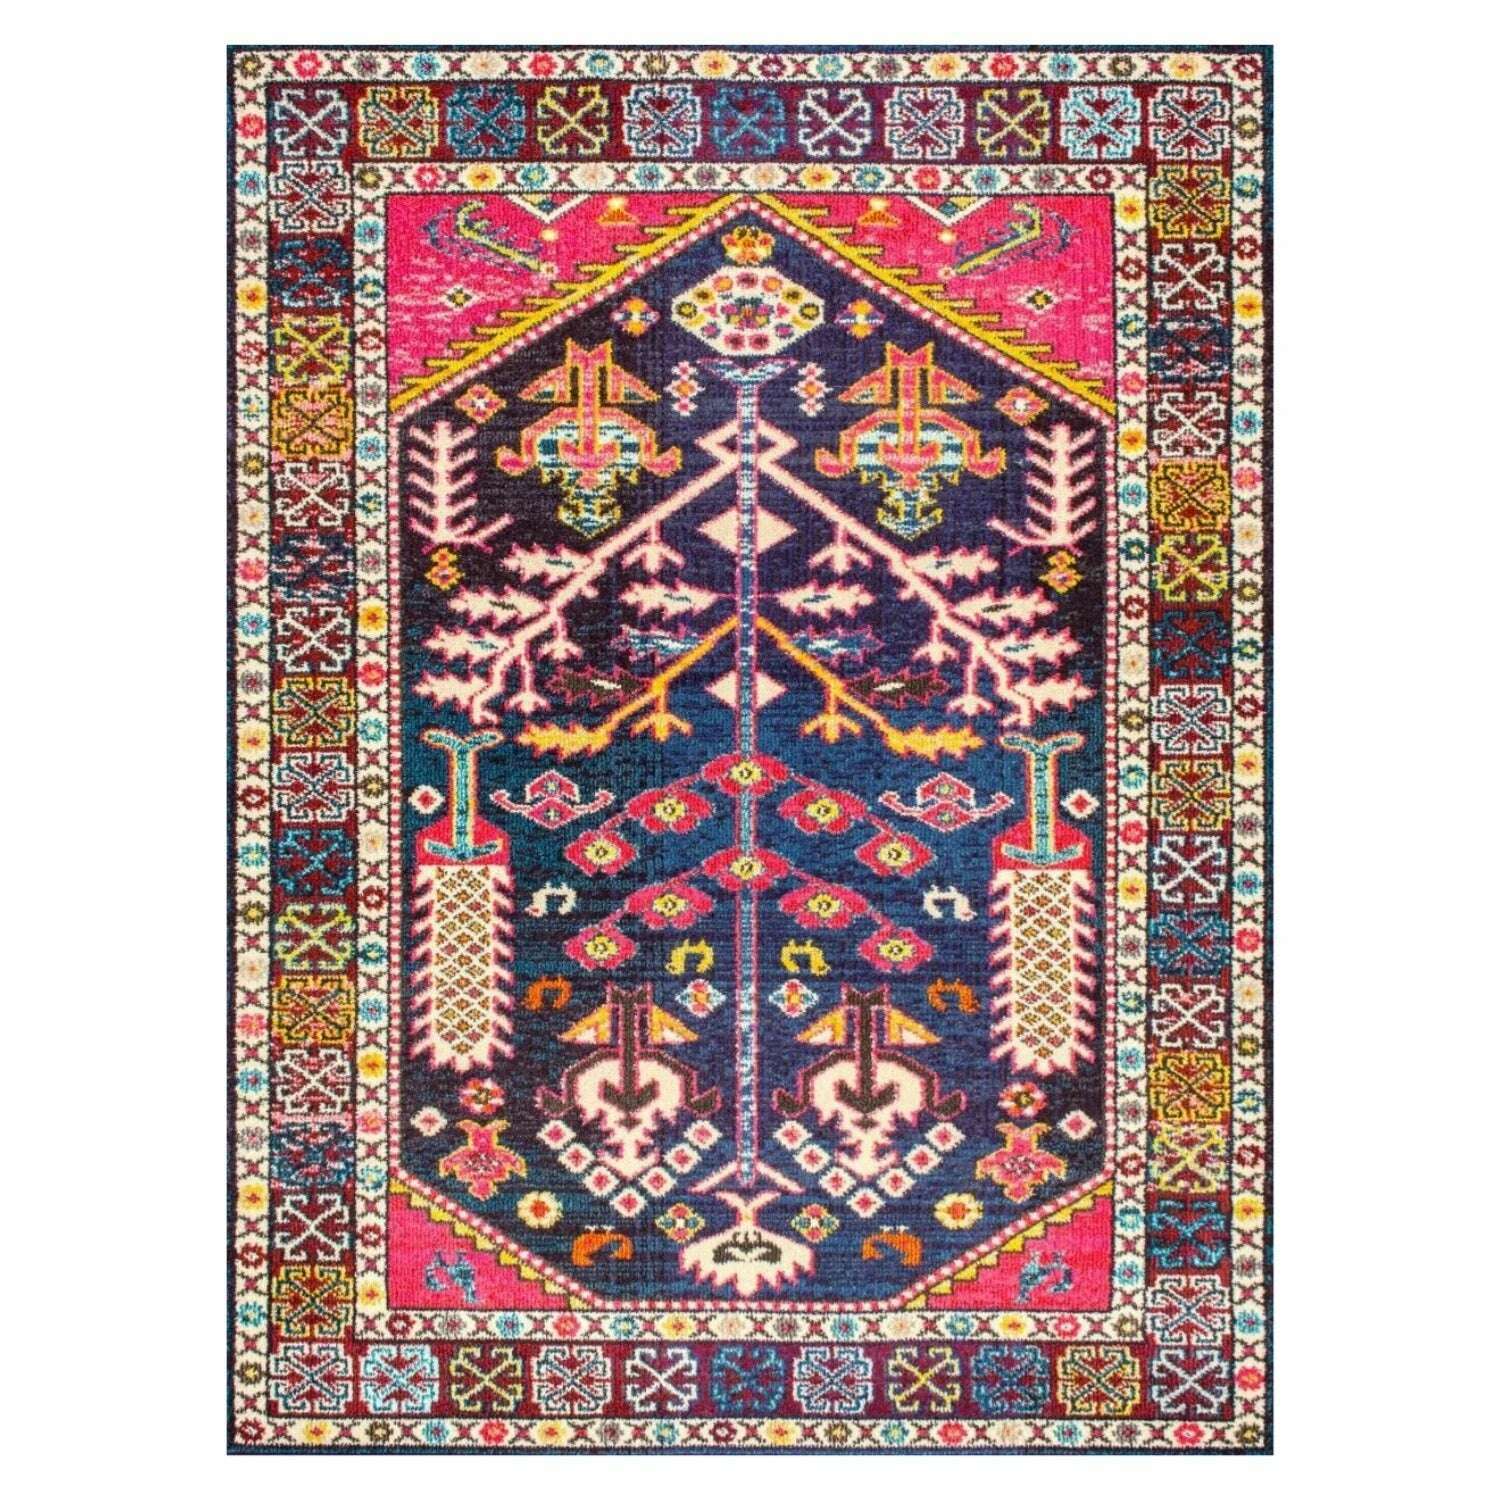 Light Luxury Morocco Bedroom Carpet Persian Style Living Room Rugs American Coffee Table Mat Home Vintage Bedside Entrance Mats, 13 / 120x160cm, KIMLUD Women's Clothes